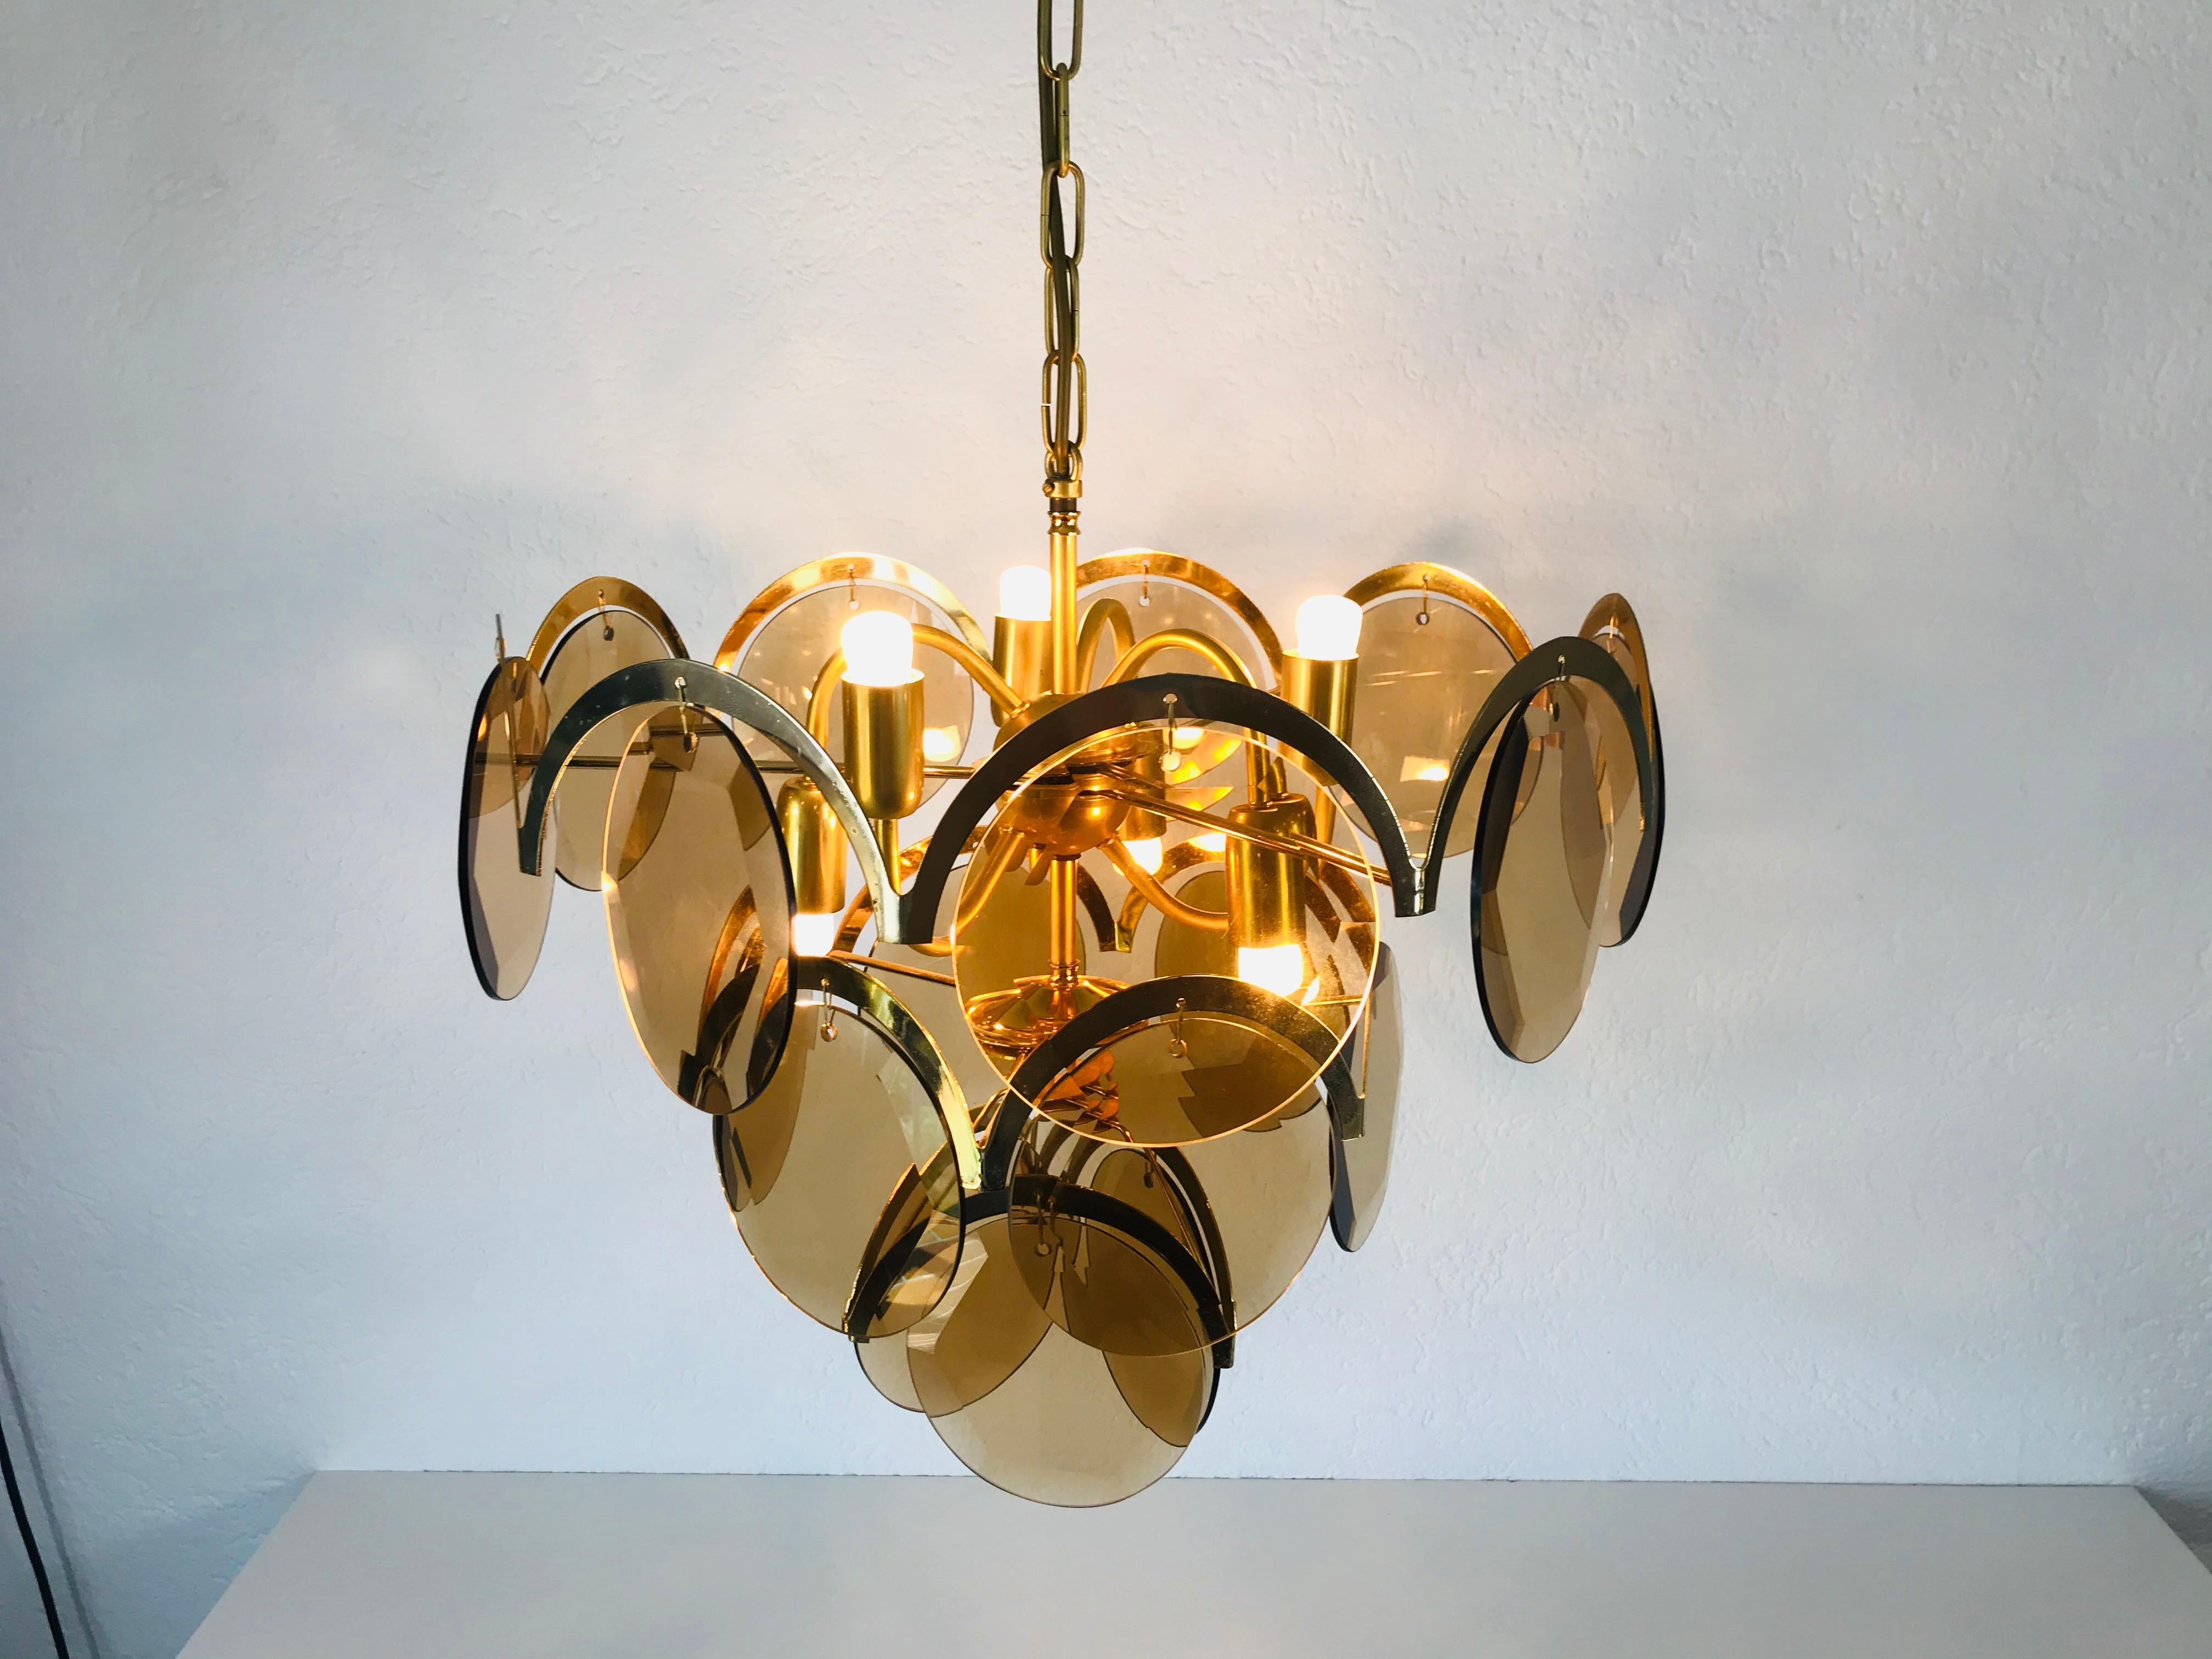 German Midcentury Three-Tier Brass and Glass Chandelier by Vistosi, 1960s For Sale